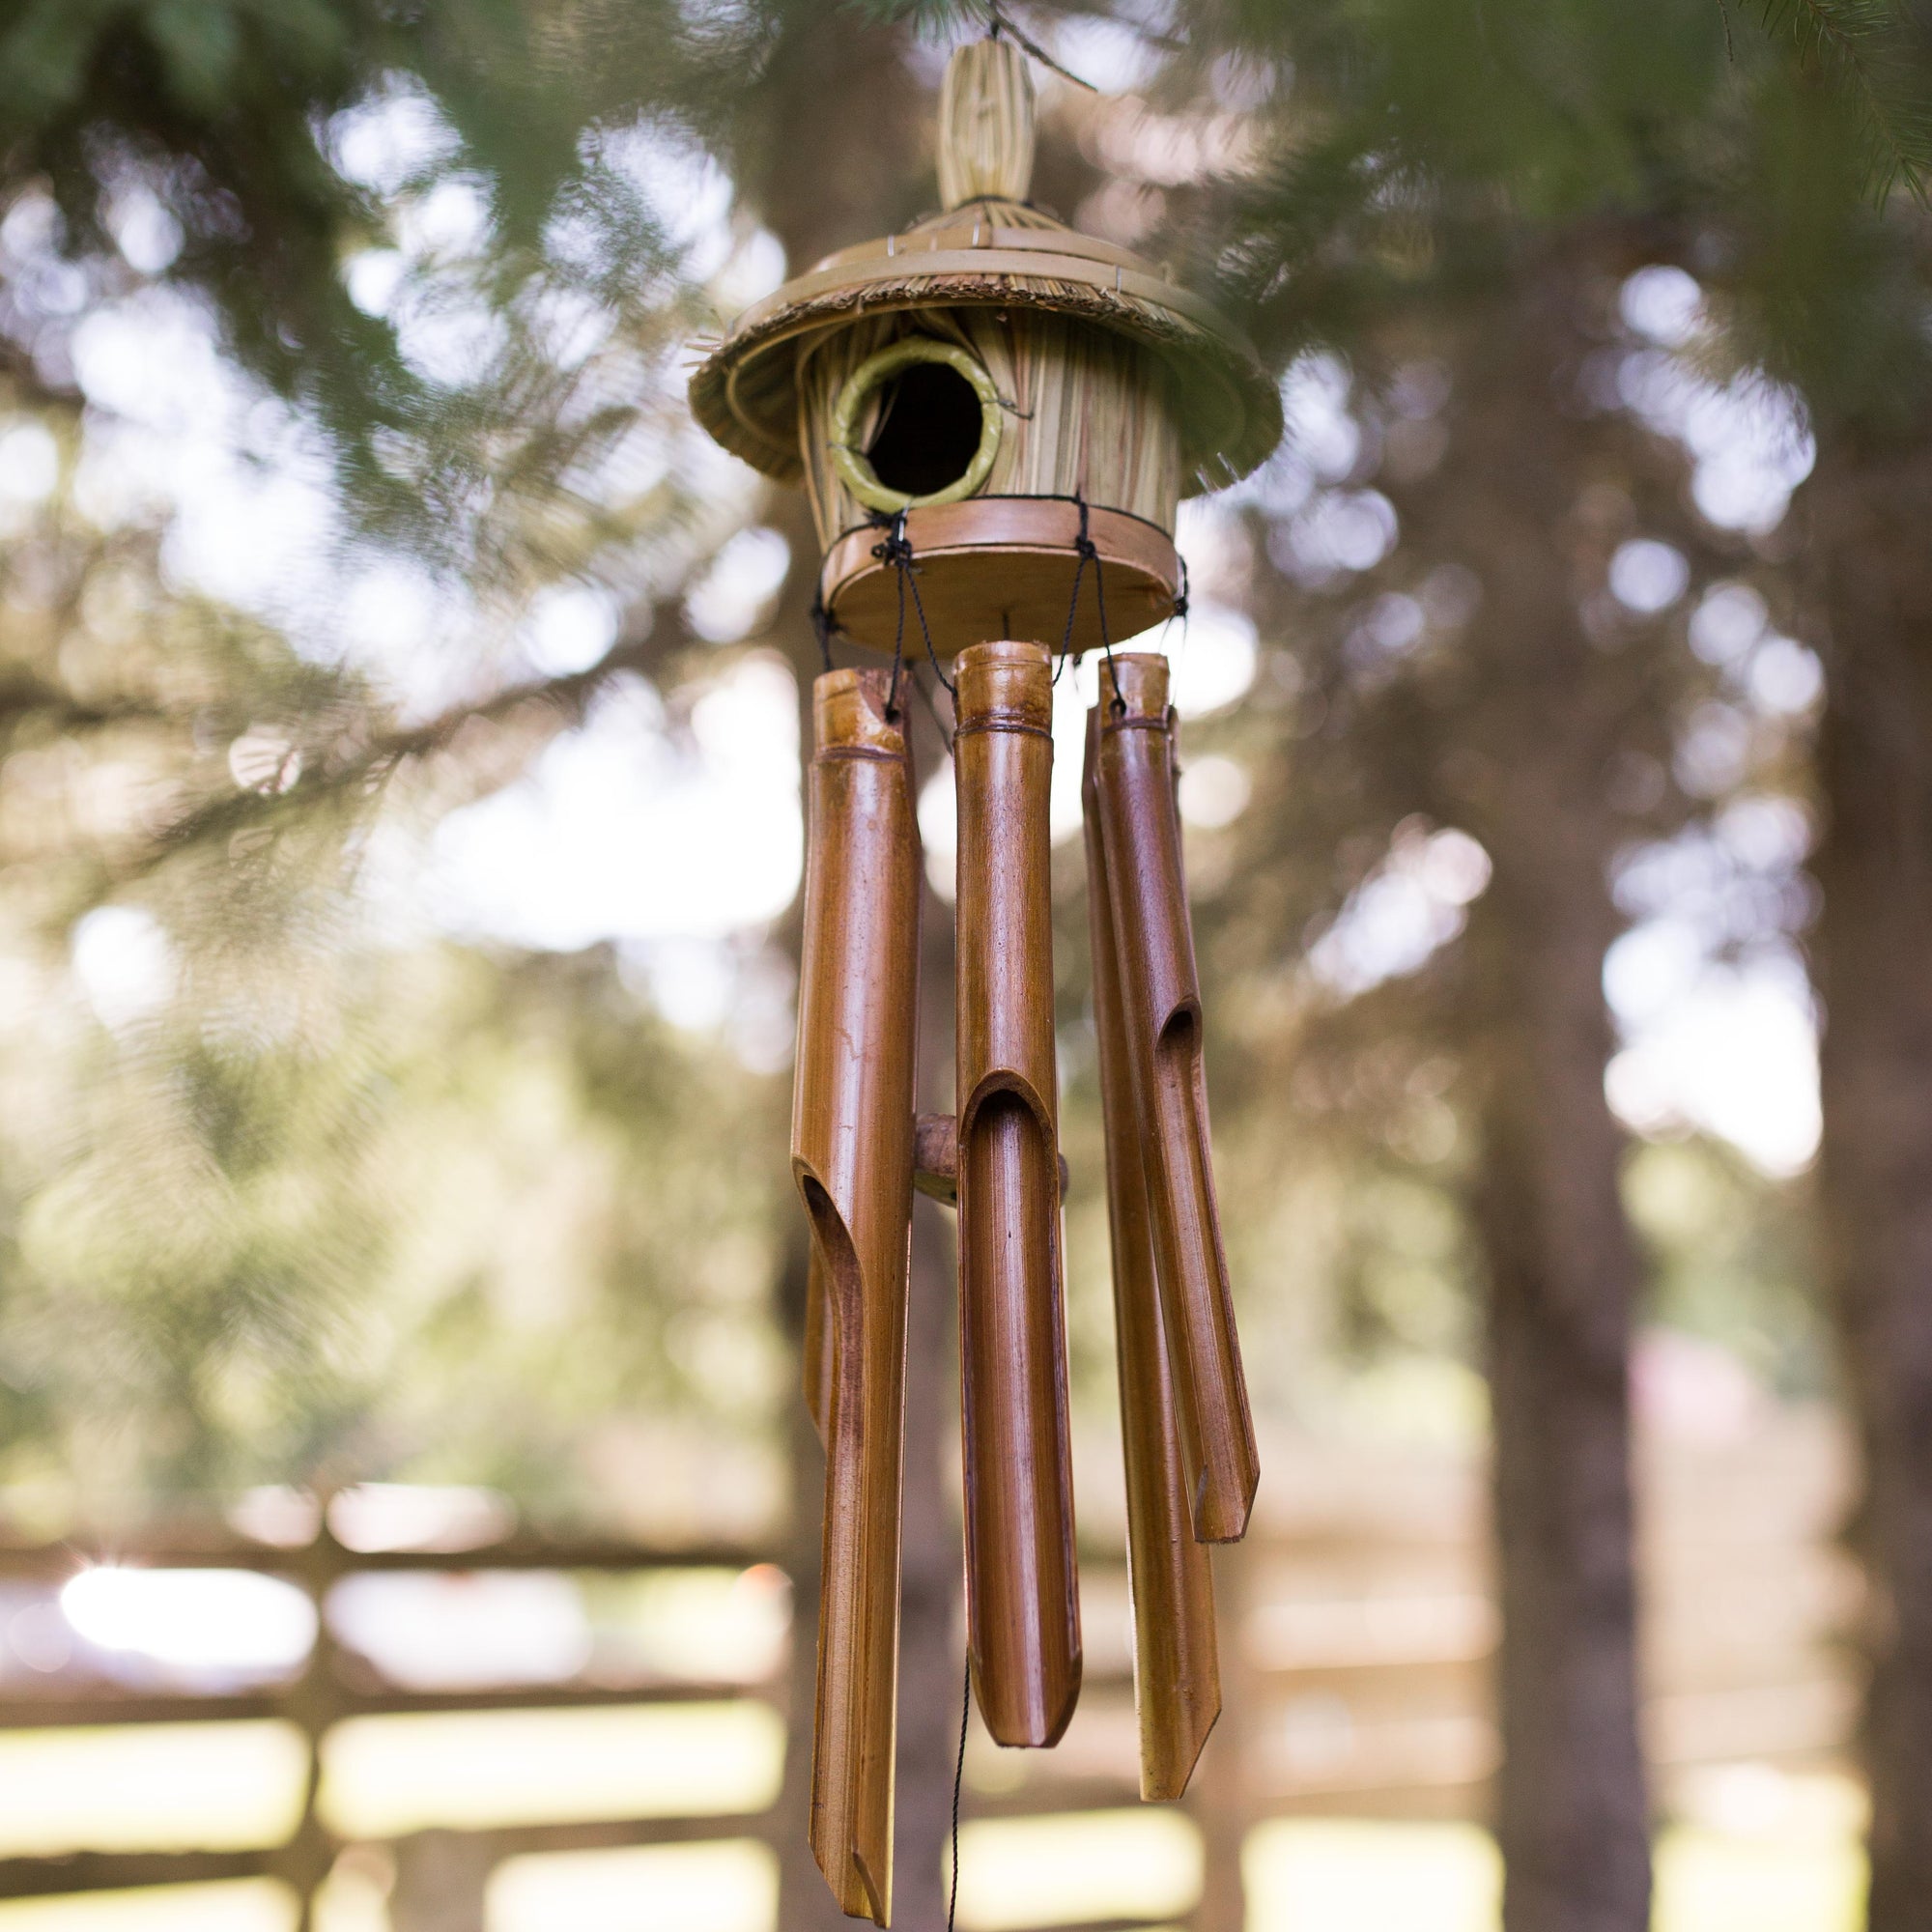 Photo of windchimes with a small grass bird house on top